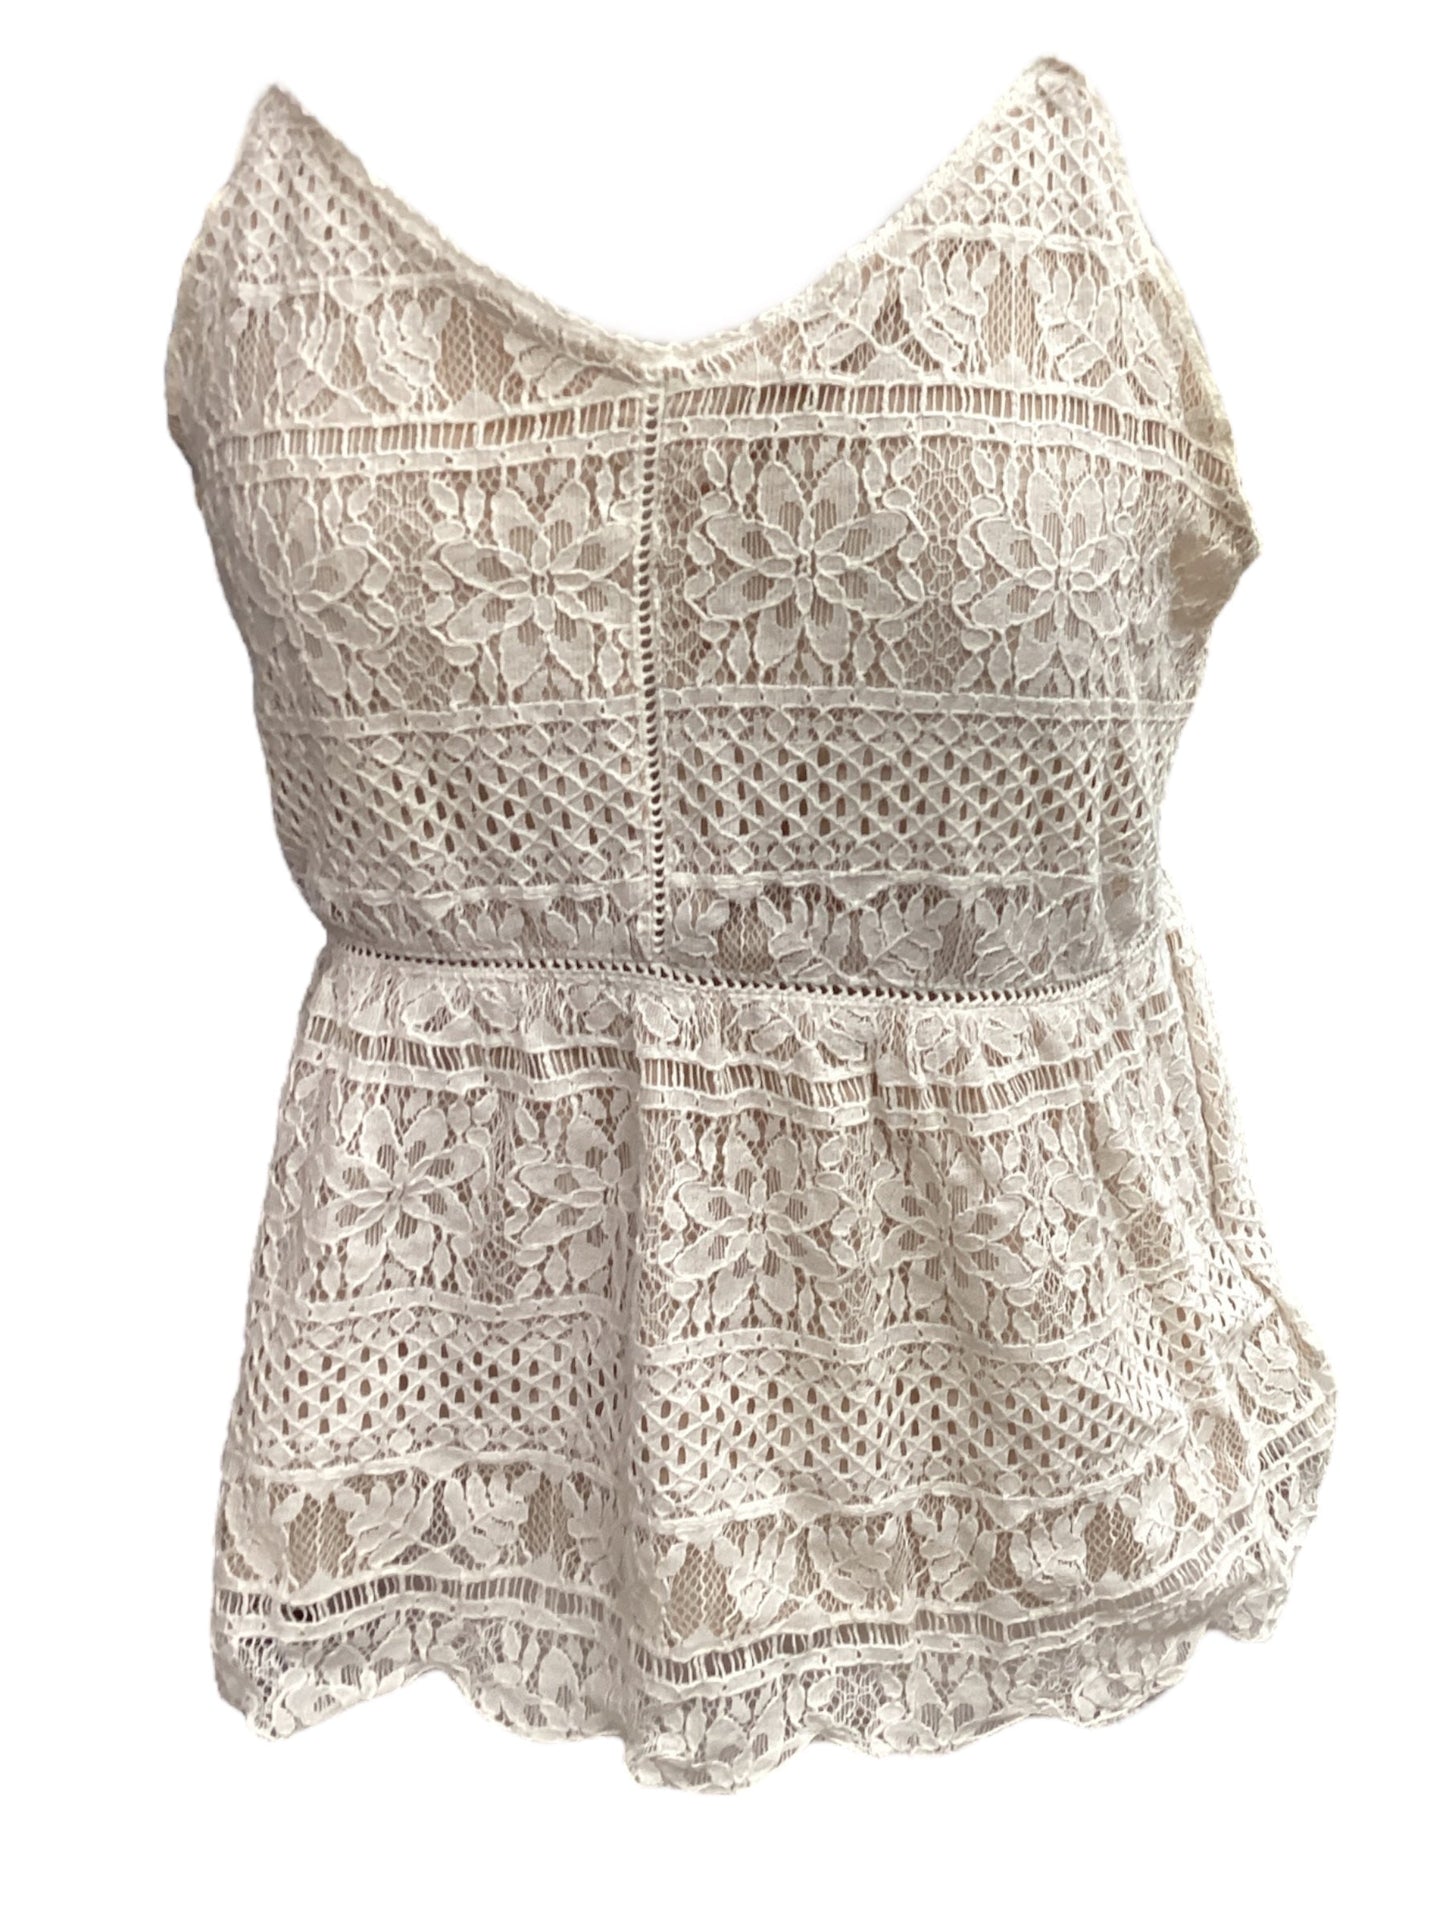 Cream Top Cami Maurices, Size S